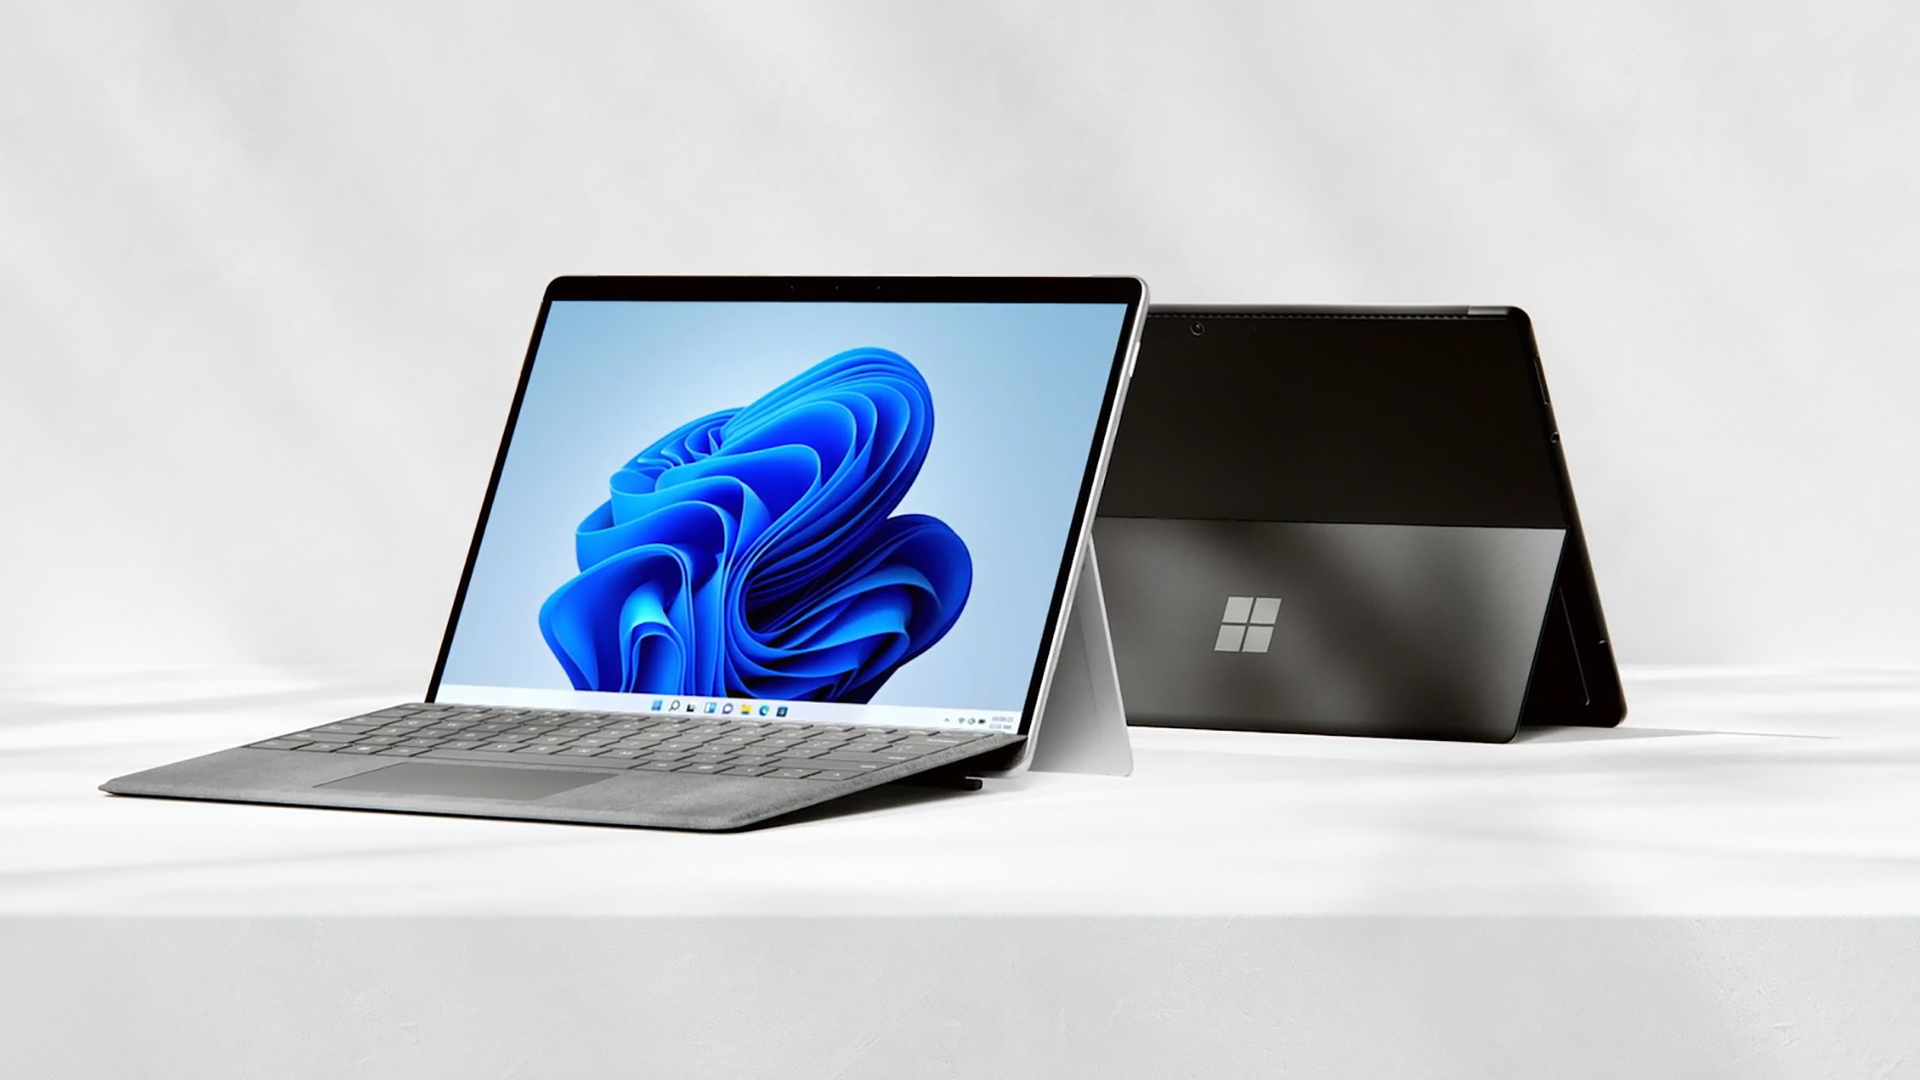 Everything we saw at the 2021 Microsoft Surface event